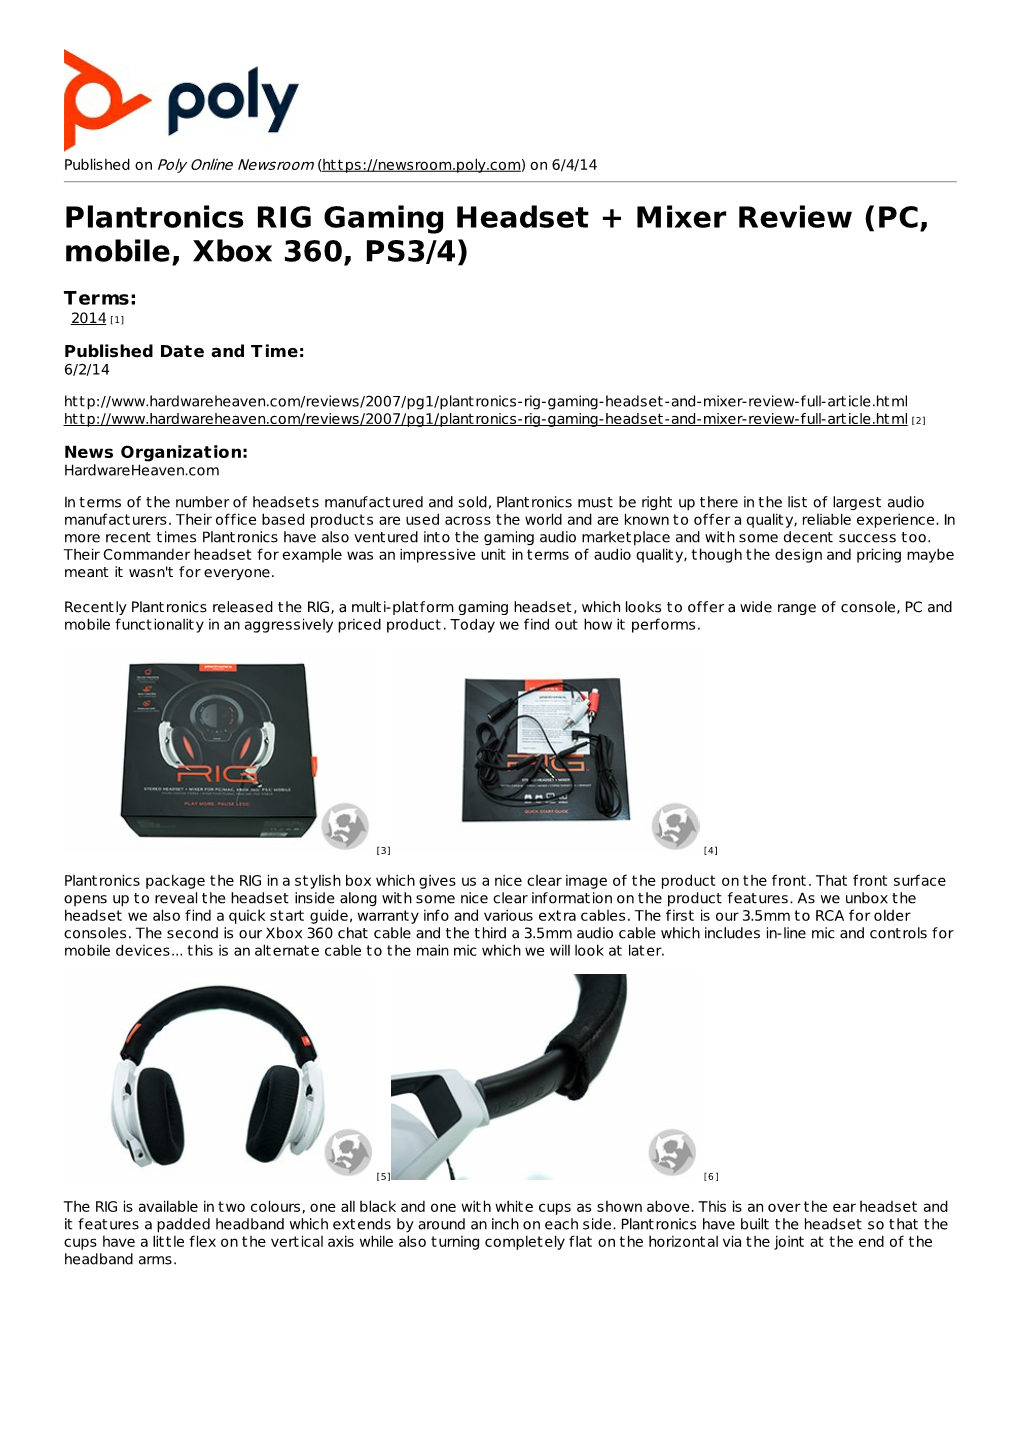 Plantronics RIG Gaming Headset + Mixer Review (PC, Mobile, Xbox 360, PS3/4)